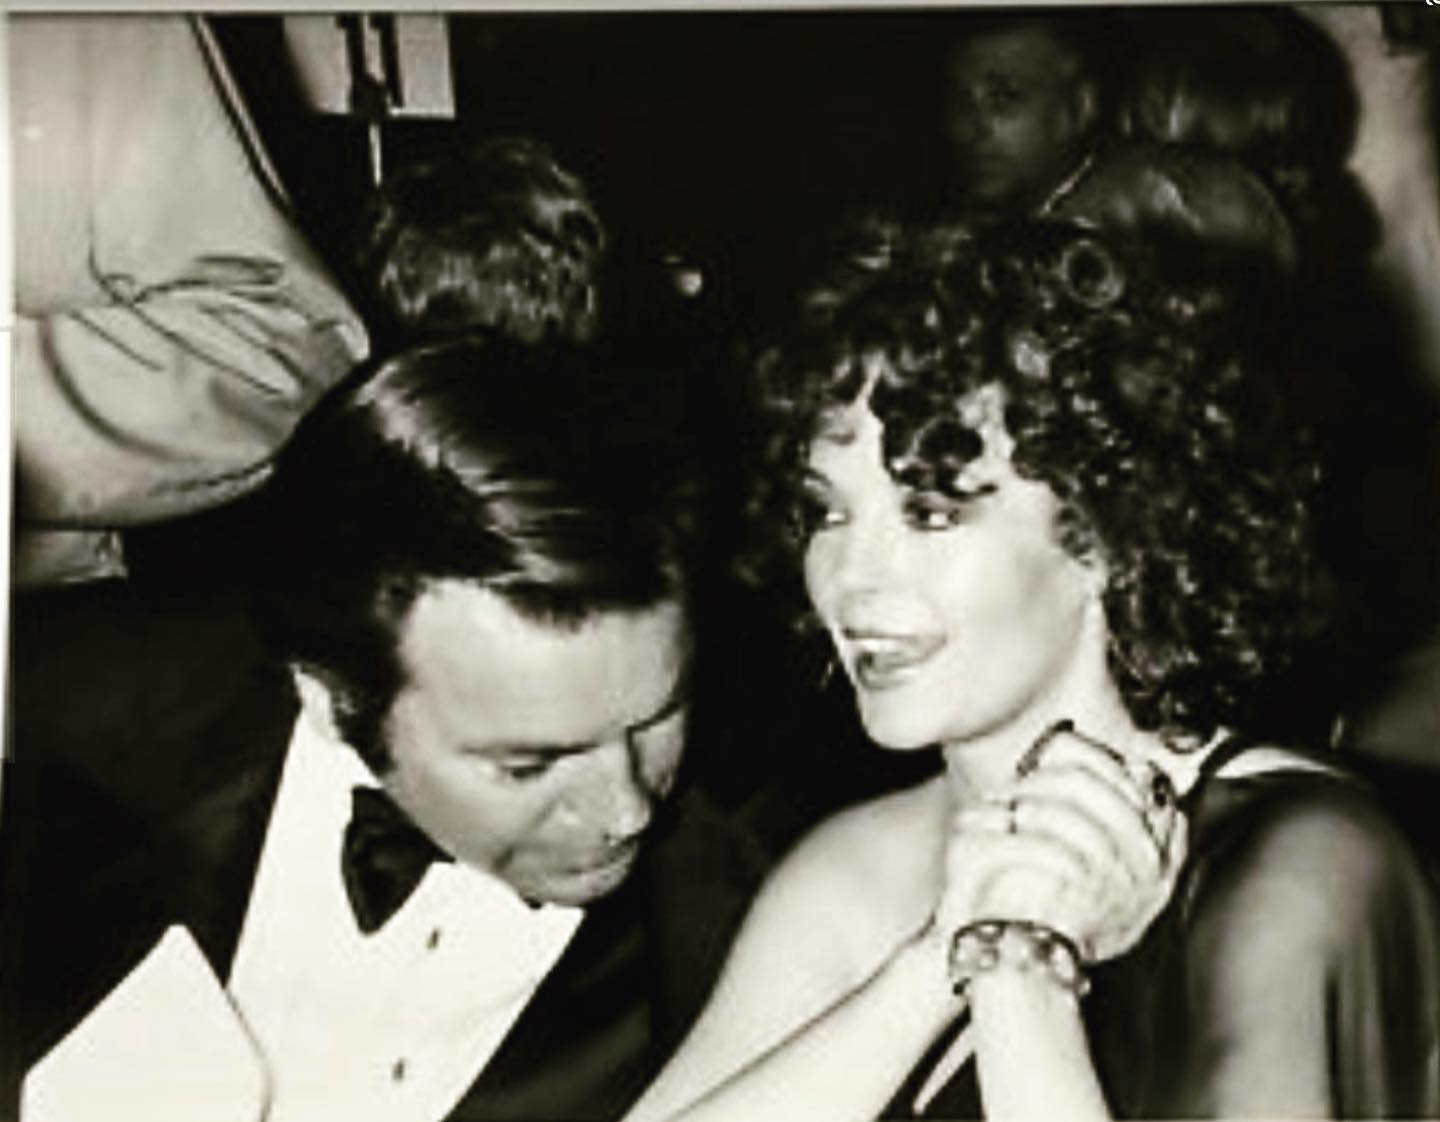 This was at the Eddy Awards in 1979. Obviously, I was looking for something, I can’t remember what it was.  Hope everyone is good and taking care of yourselves. Have a great weekend. .
.
.

#RobertWagner
#nataliewood
#ittakesathief 
#alexandermundy
#actor
#hollywood 
#goldenageofhollywood 
#oldhollywood 
#vintage 
#vintageactor 
#vintagemovies 
#vintagemovie 
##switch 
#harttohart 
#ncis 
#navycis 
#dinozzo 
#dinozzosenior 
#switch 
#harttohart 
#jonathanhart 
#ncis 
#navycis 
#dinozzo 
#dinozzosenior